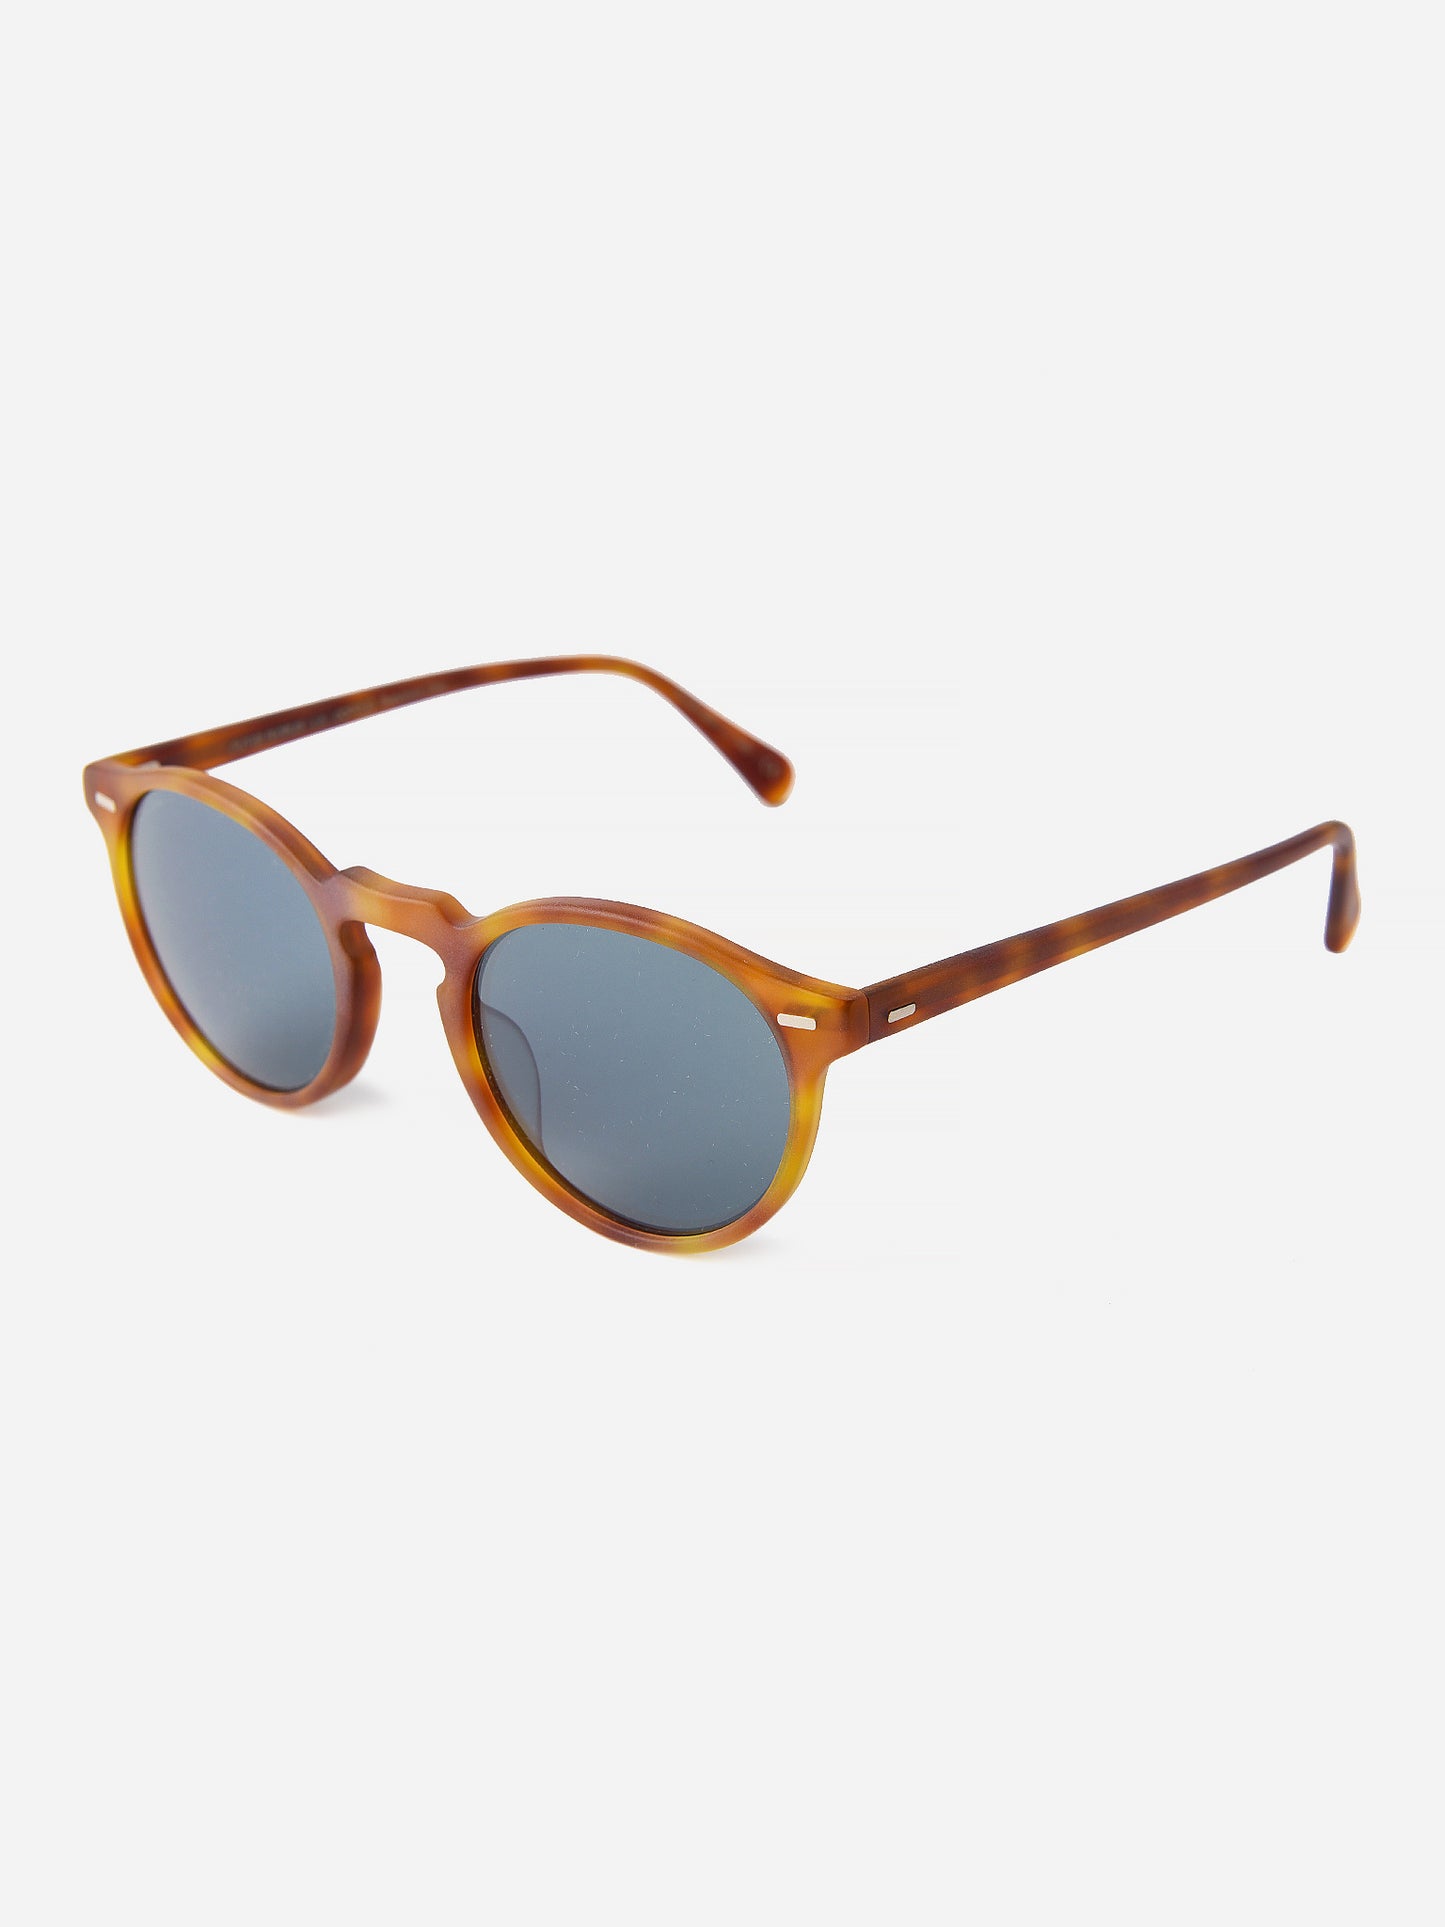 Oliver Peoples Gregory Peck Sunglasses